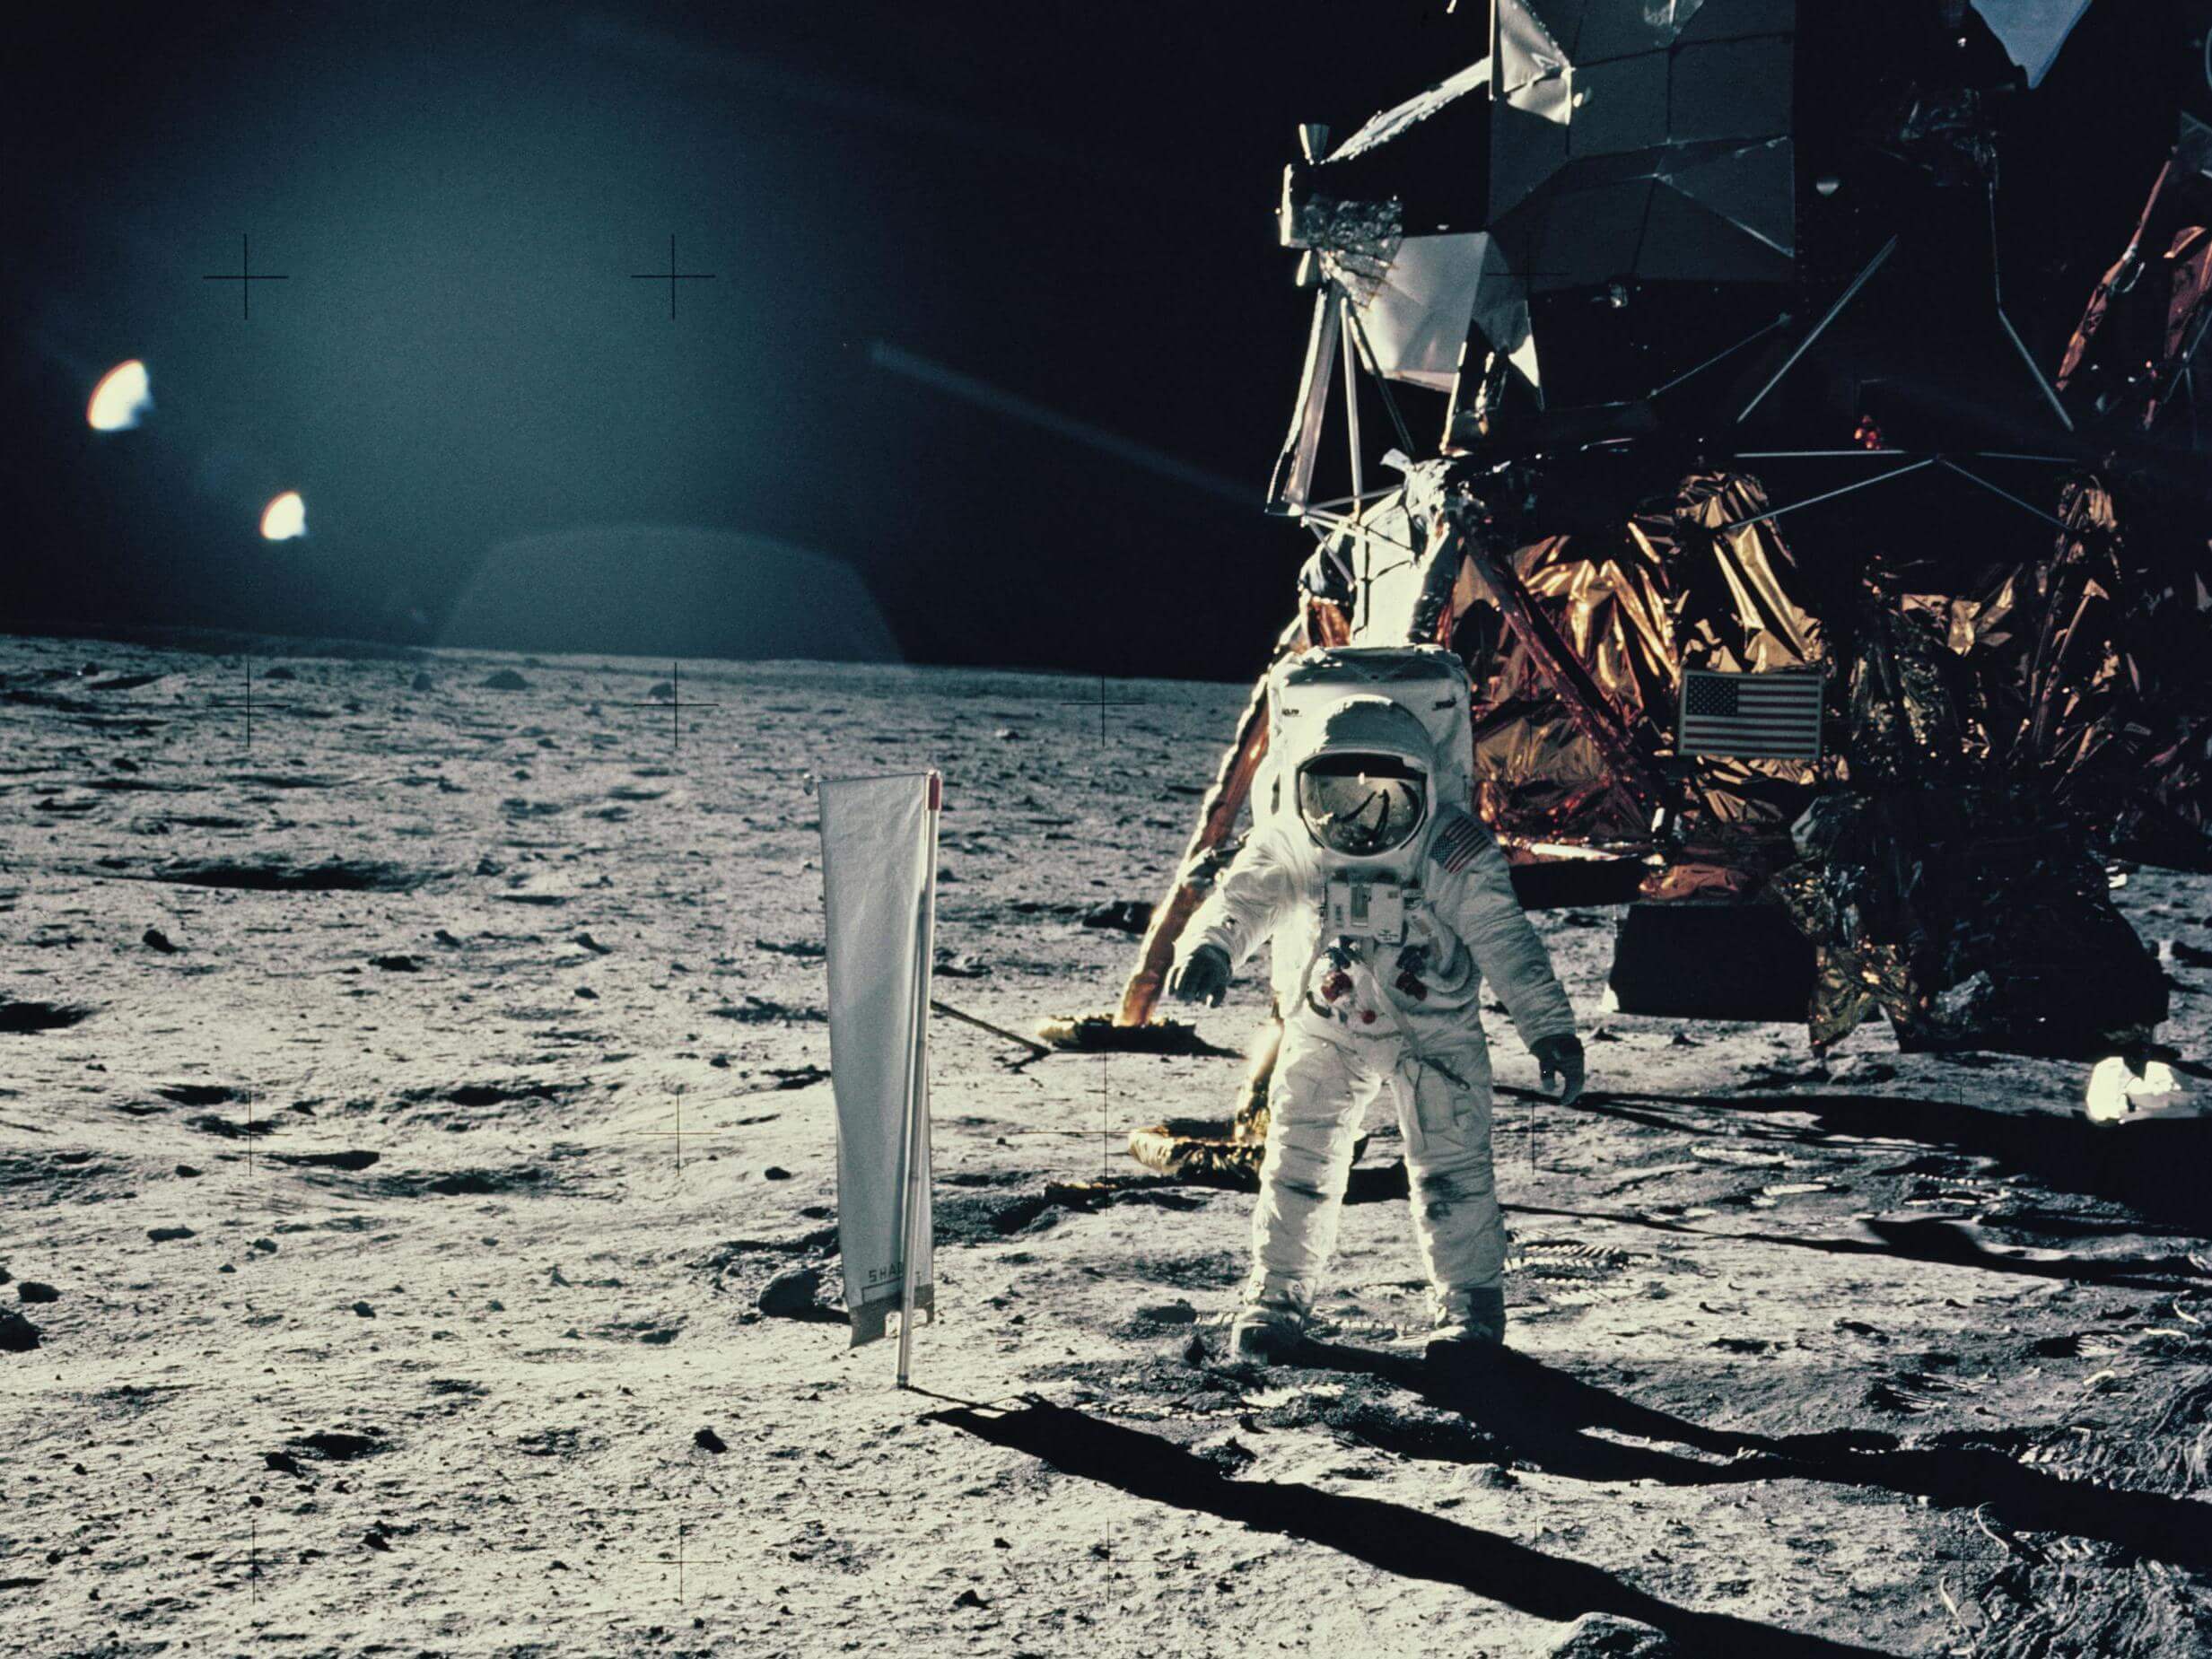 How many times people landed on the moon?